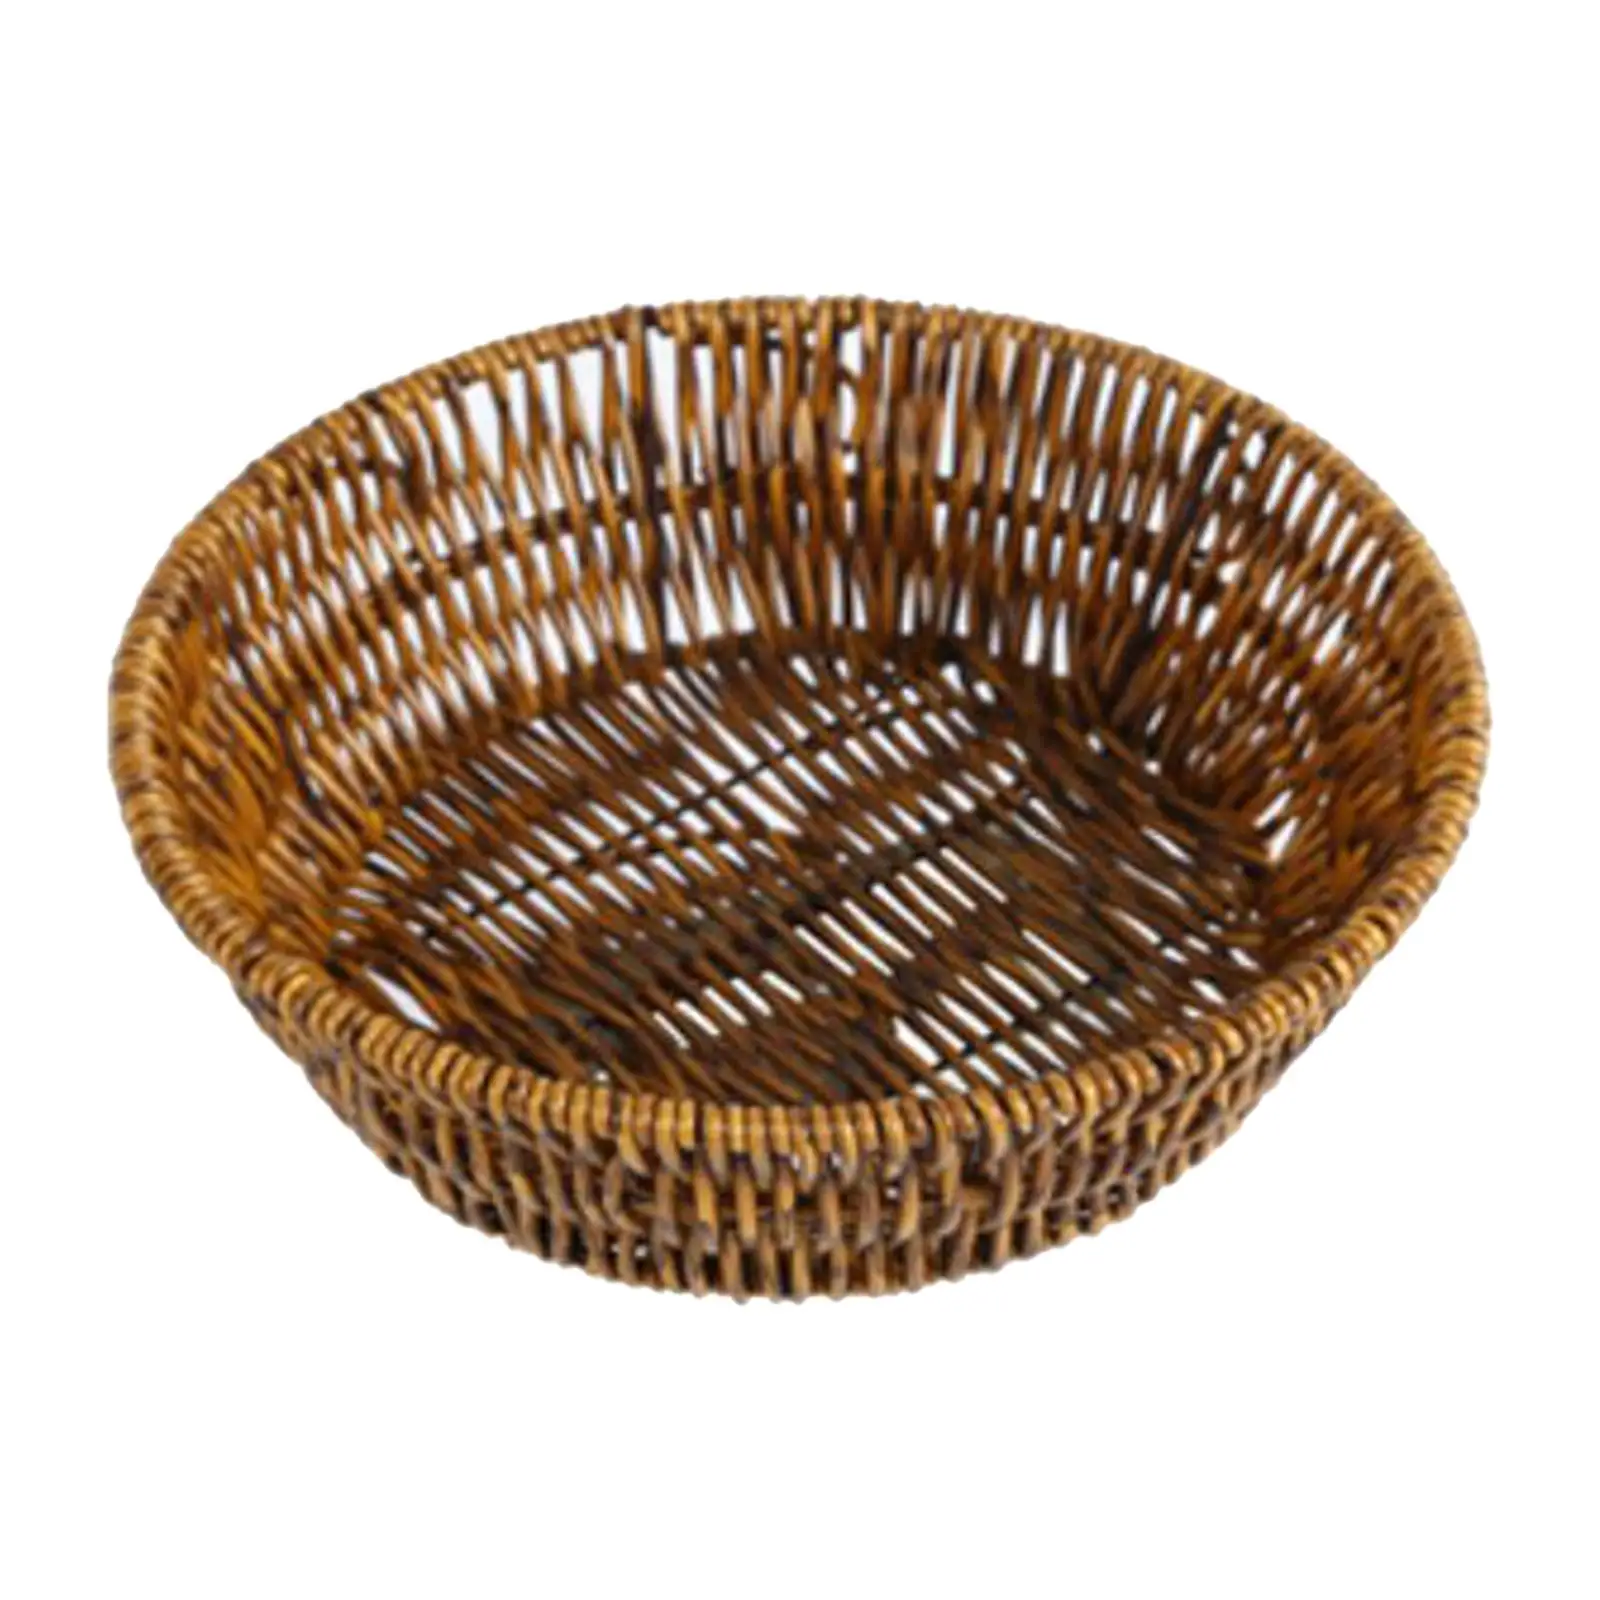 Hand Woven Bread Basket Tray Holder PP Material Rattan for Home Kitchen Bakery Simple and Practical Versatile Restaurant Basket